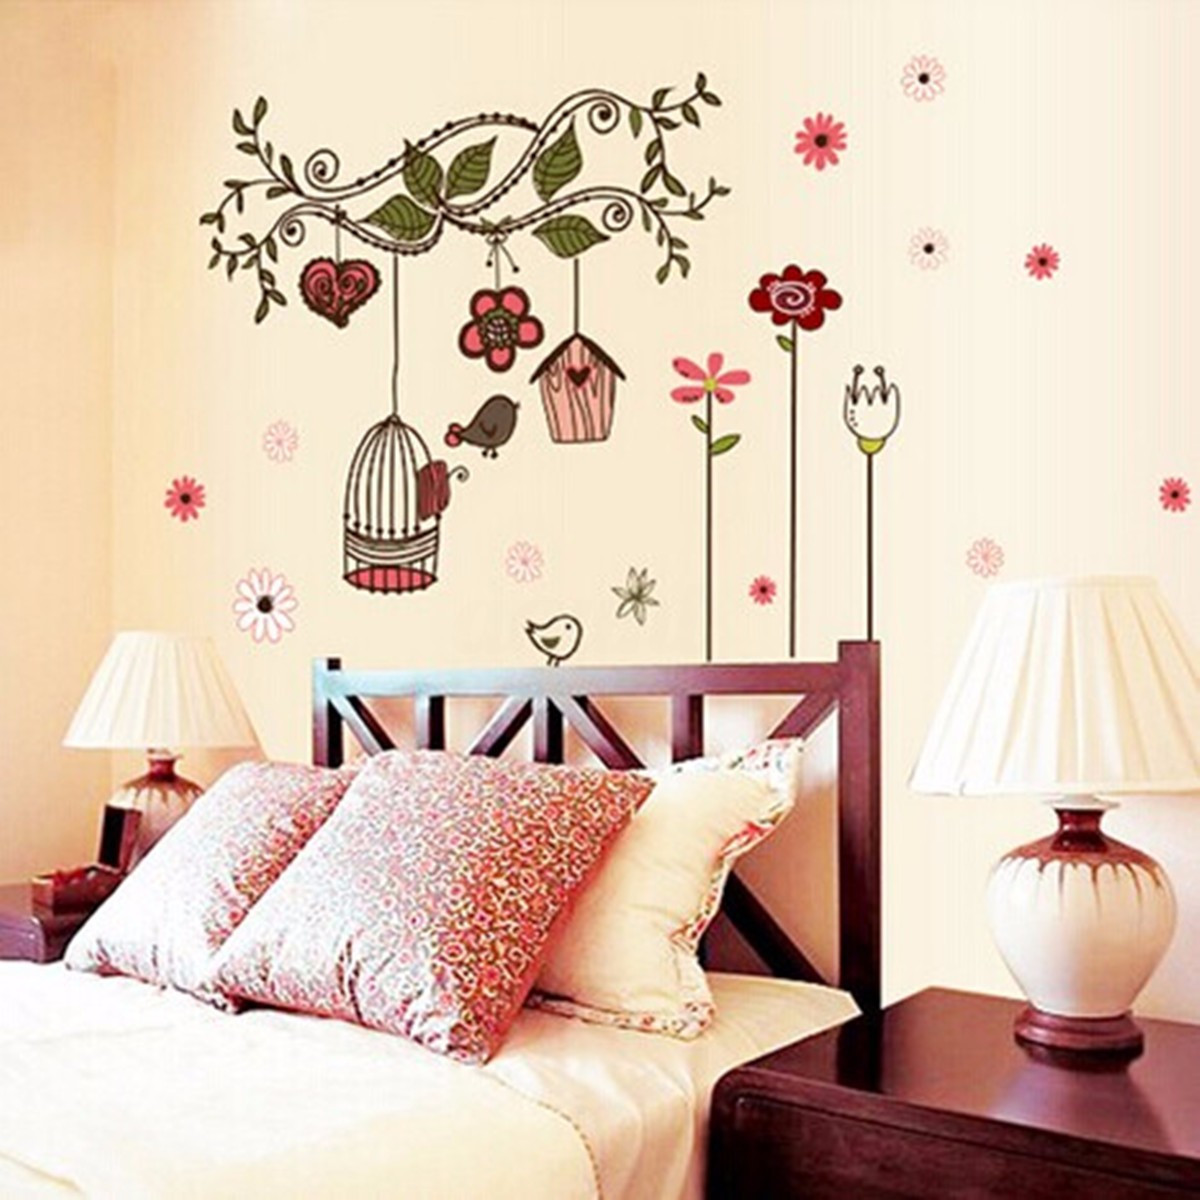 Childrens Bedroom Wall Stickers Removable
 DIY Removable Tree Wall Decals Kids Bedroom Baby Nursery